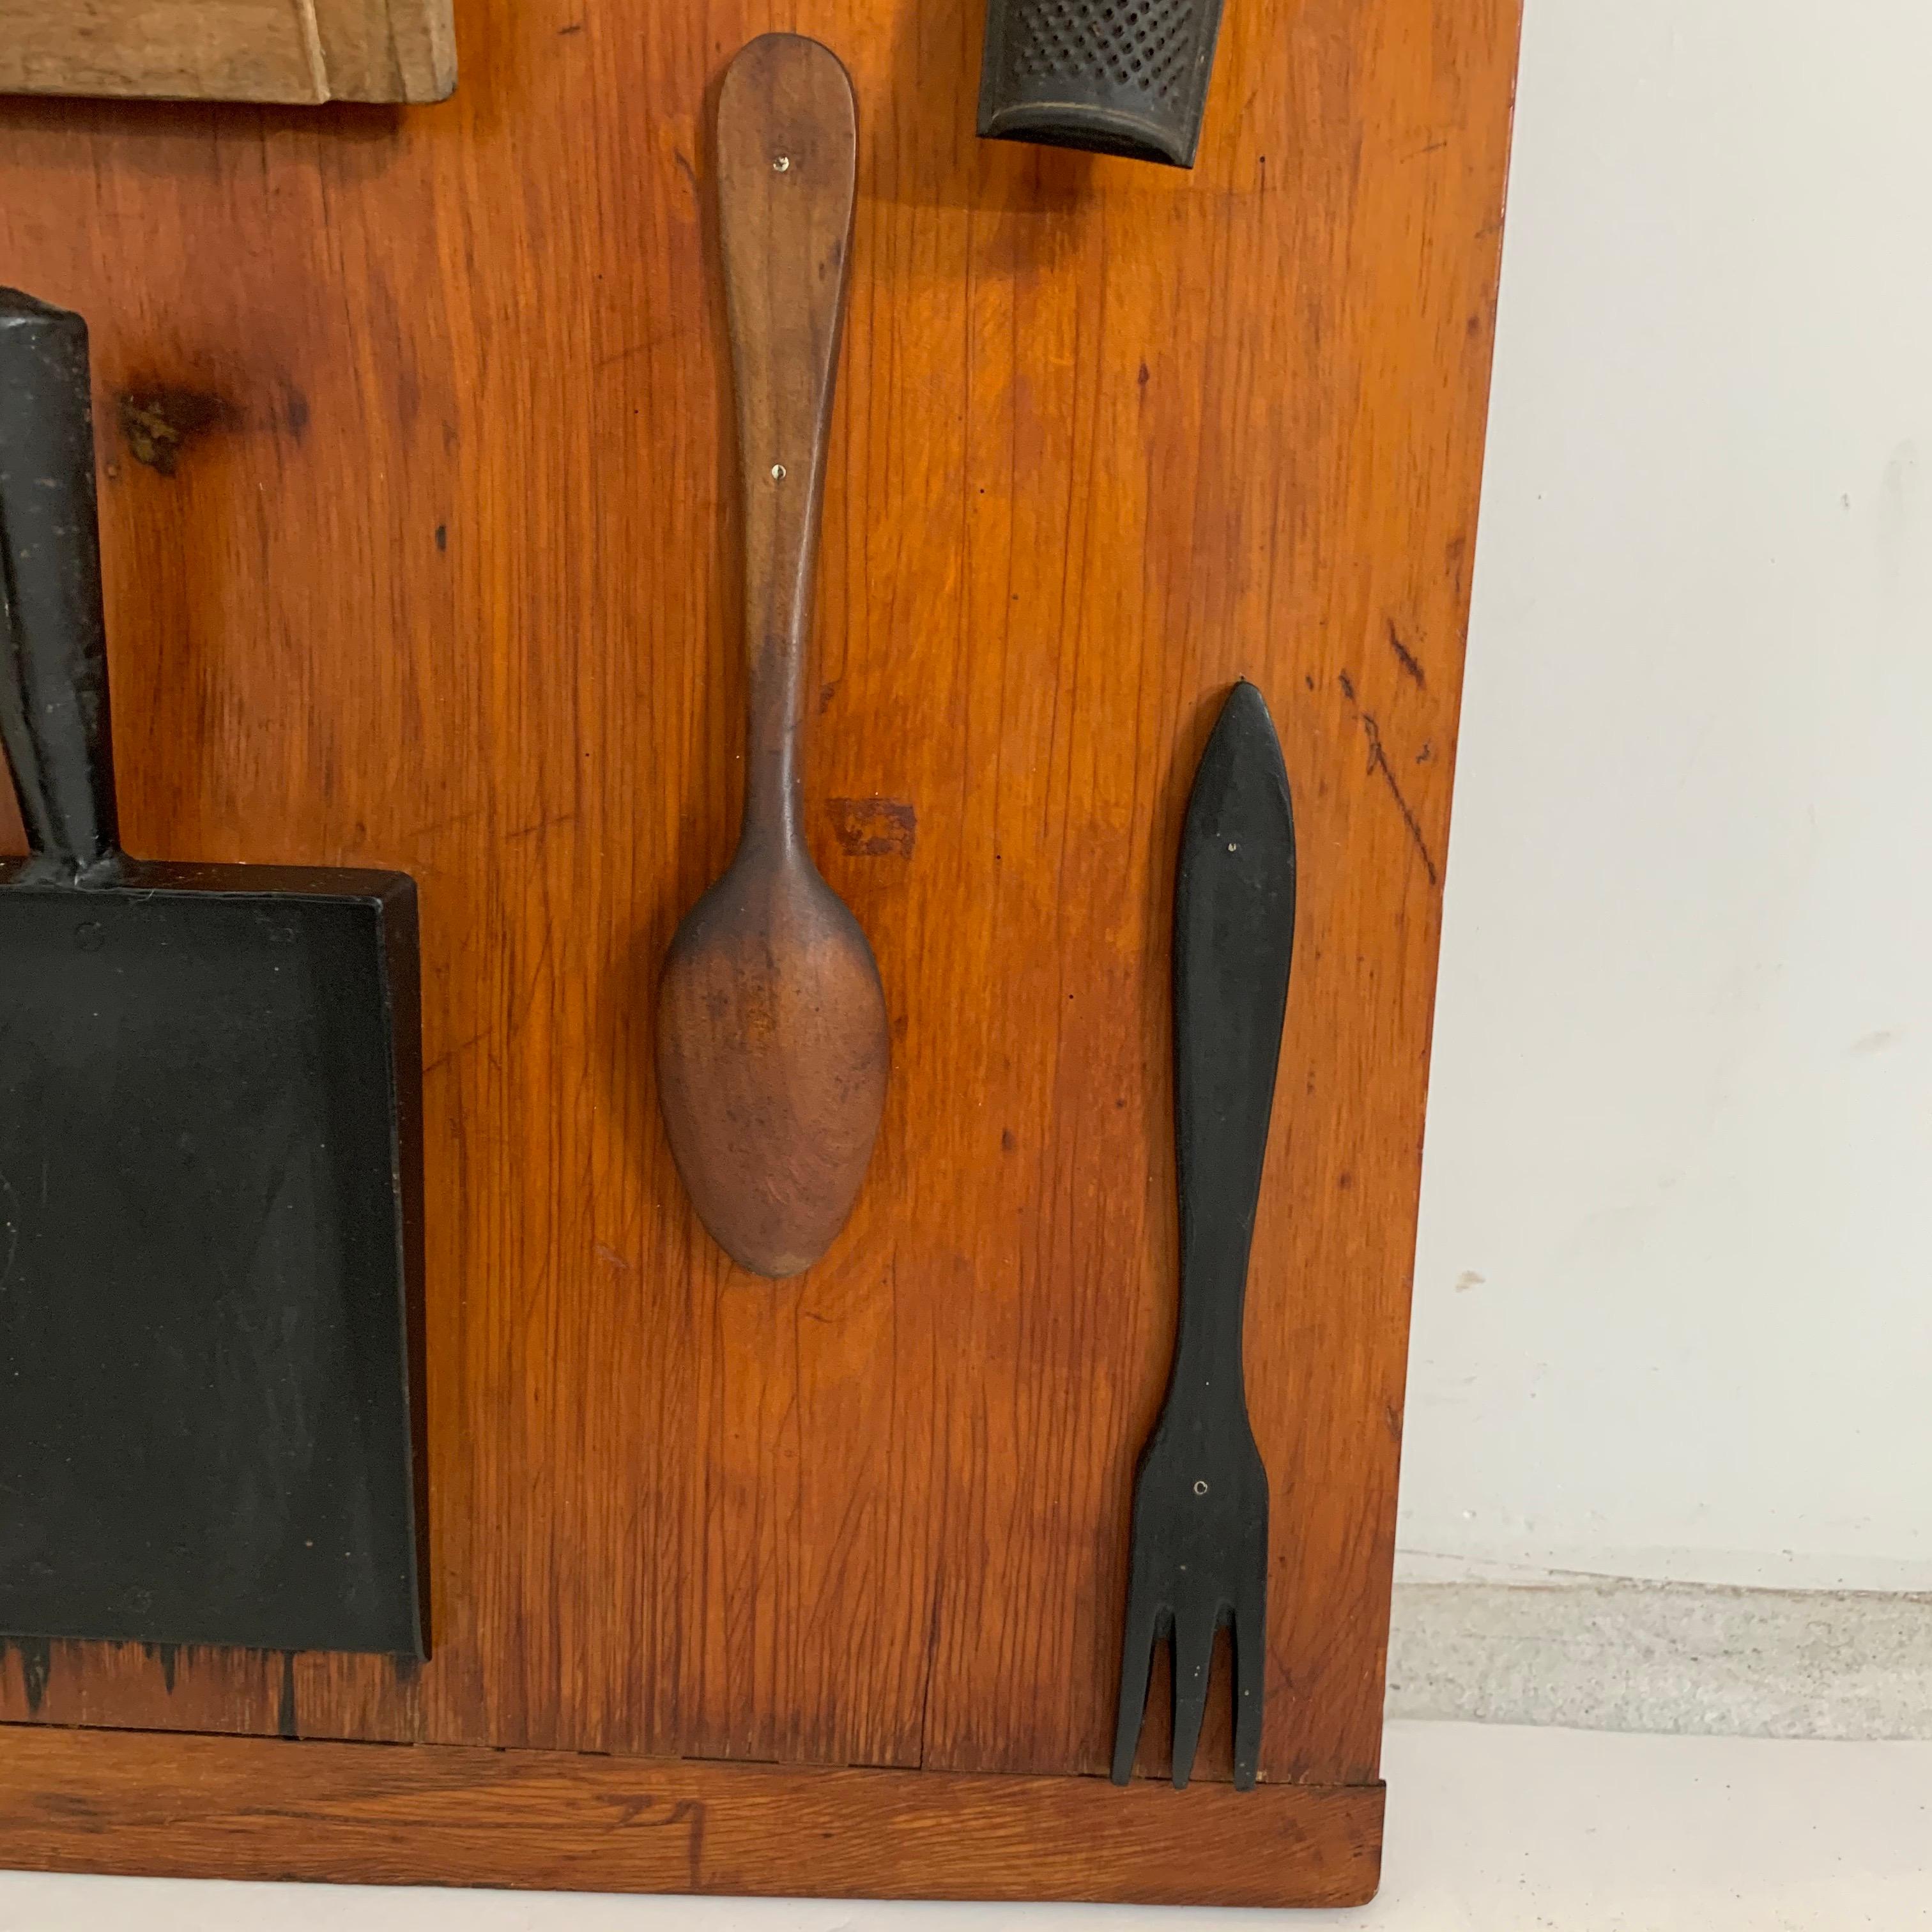 Metal Sculptural Modernist Wall Display of 18th and 19th Century Baking Tools